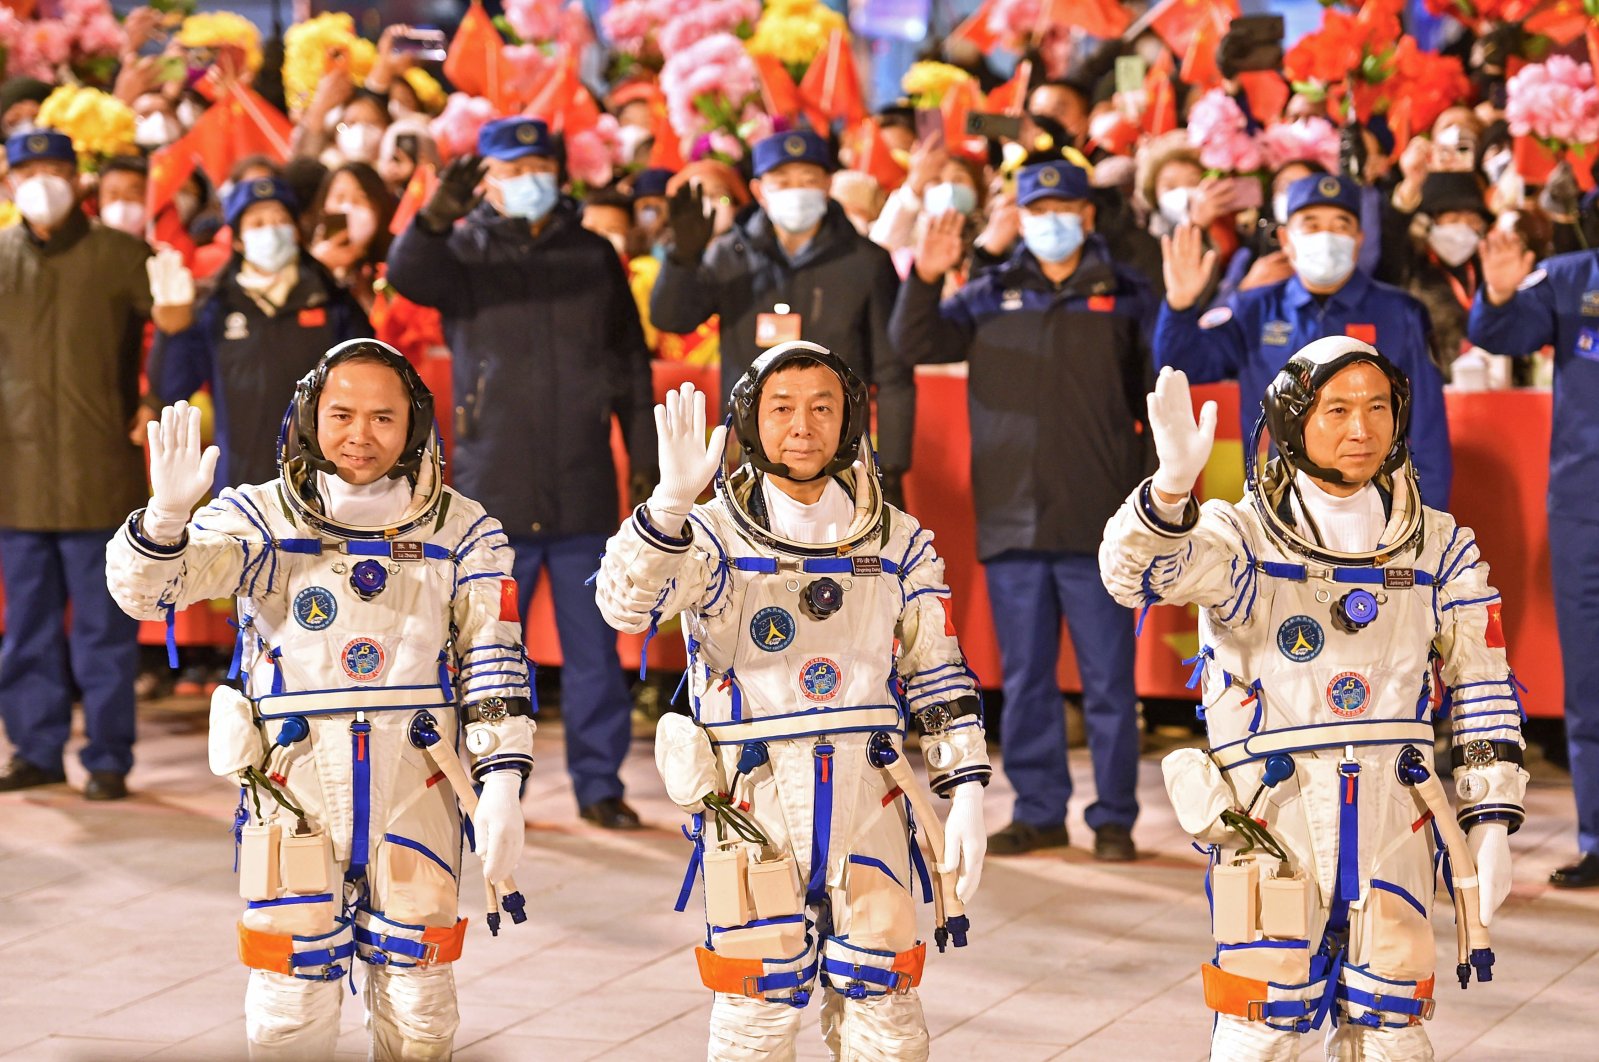 Taikonauts Fei Junlong (R), Deng Qingming (C), and Zhang Lu of the Shenzhou-15 manned space mission wave during a see-off ceremony at the Jiuquan Satellite Launch Center in Jiuquan, China, Nov. 29, 2022. (EPA Photo)